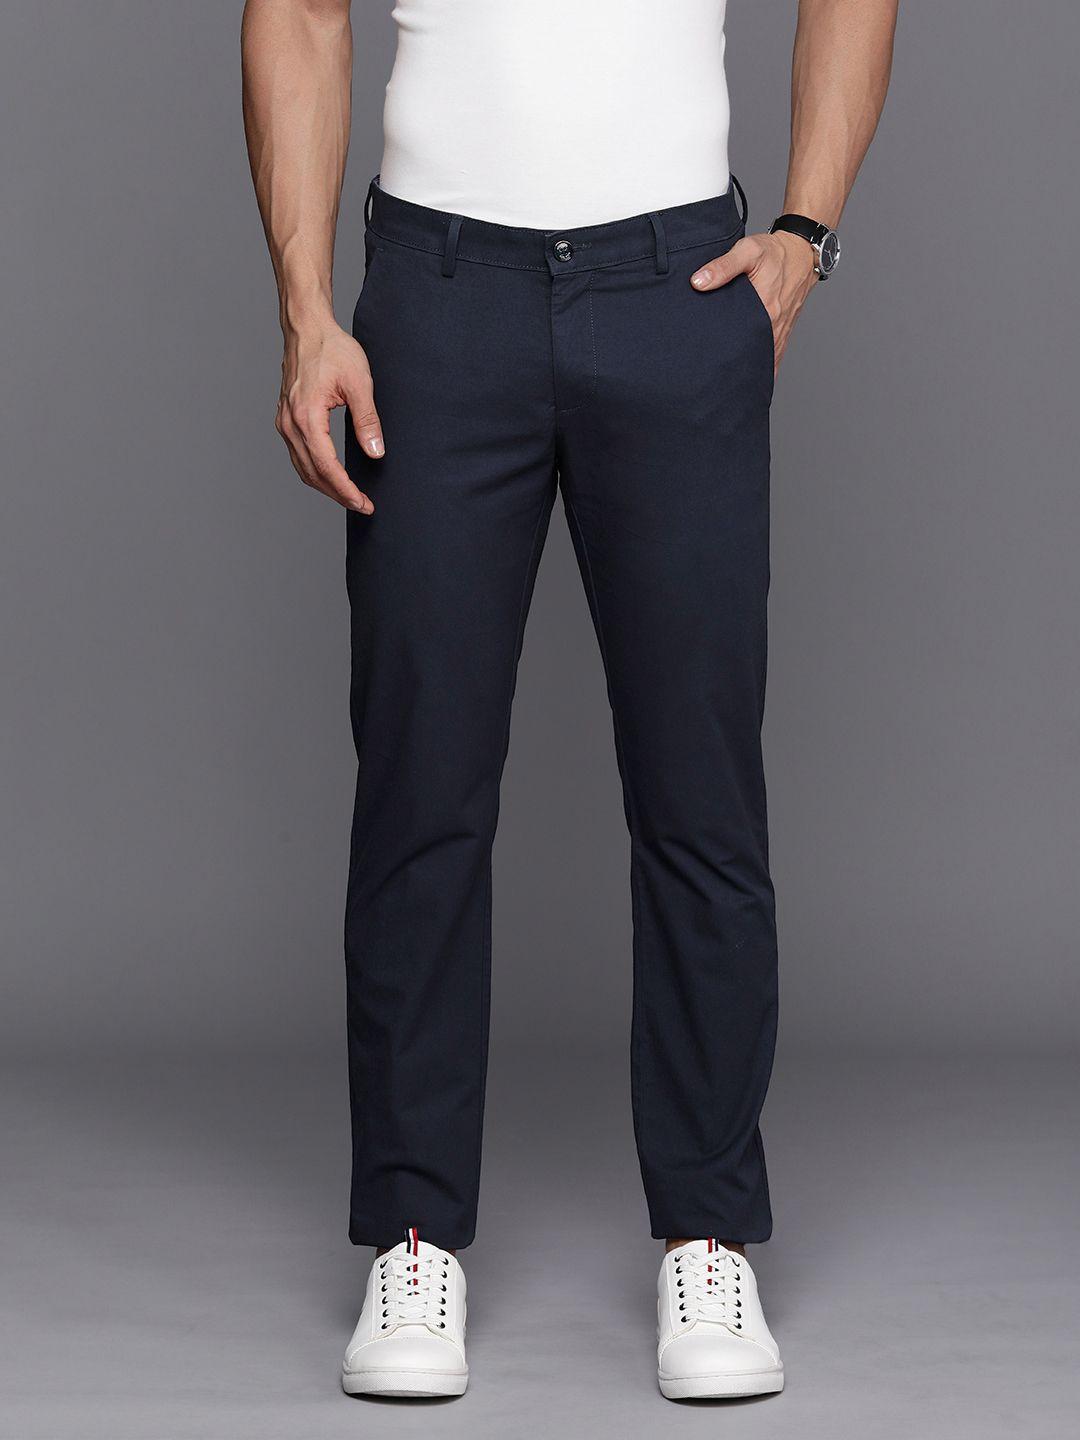 allen solly men solid slim fit mid-rise chinos